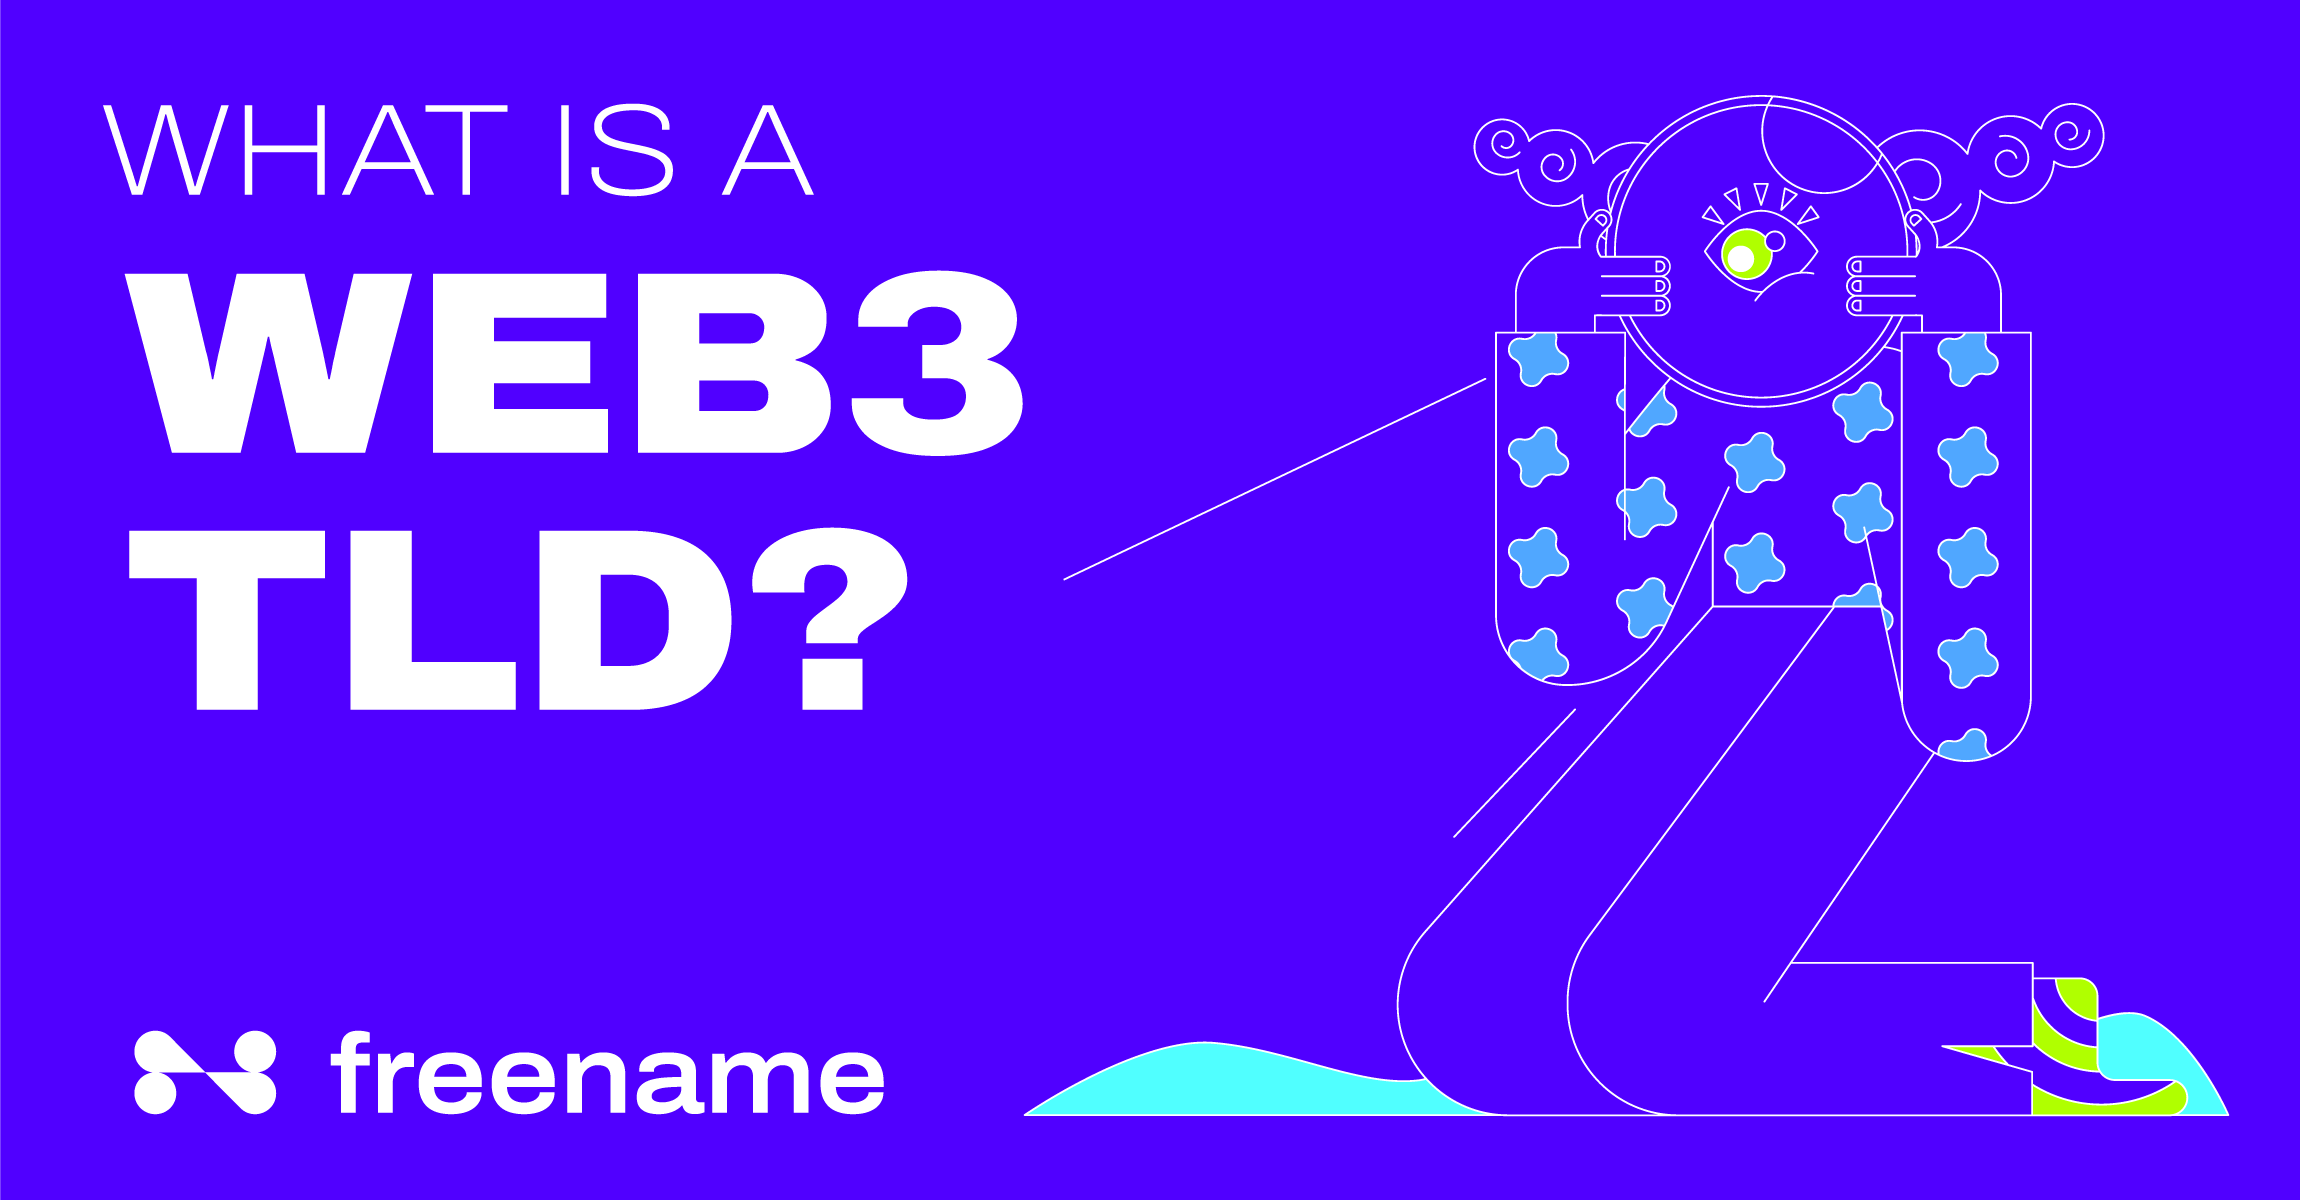 What is a Web3 TLD?